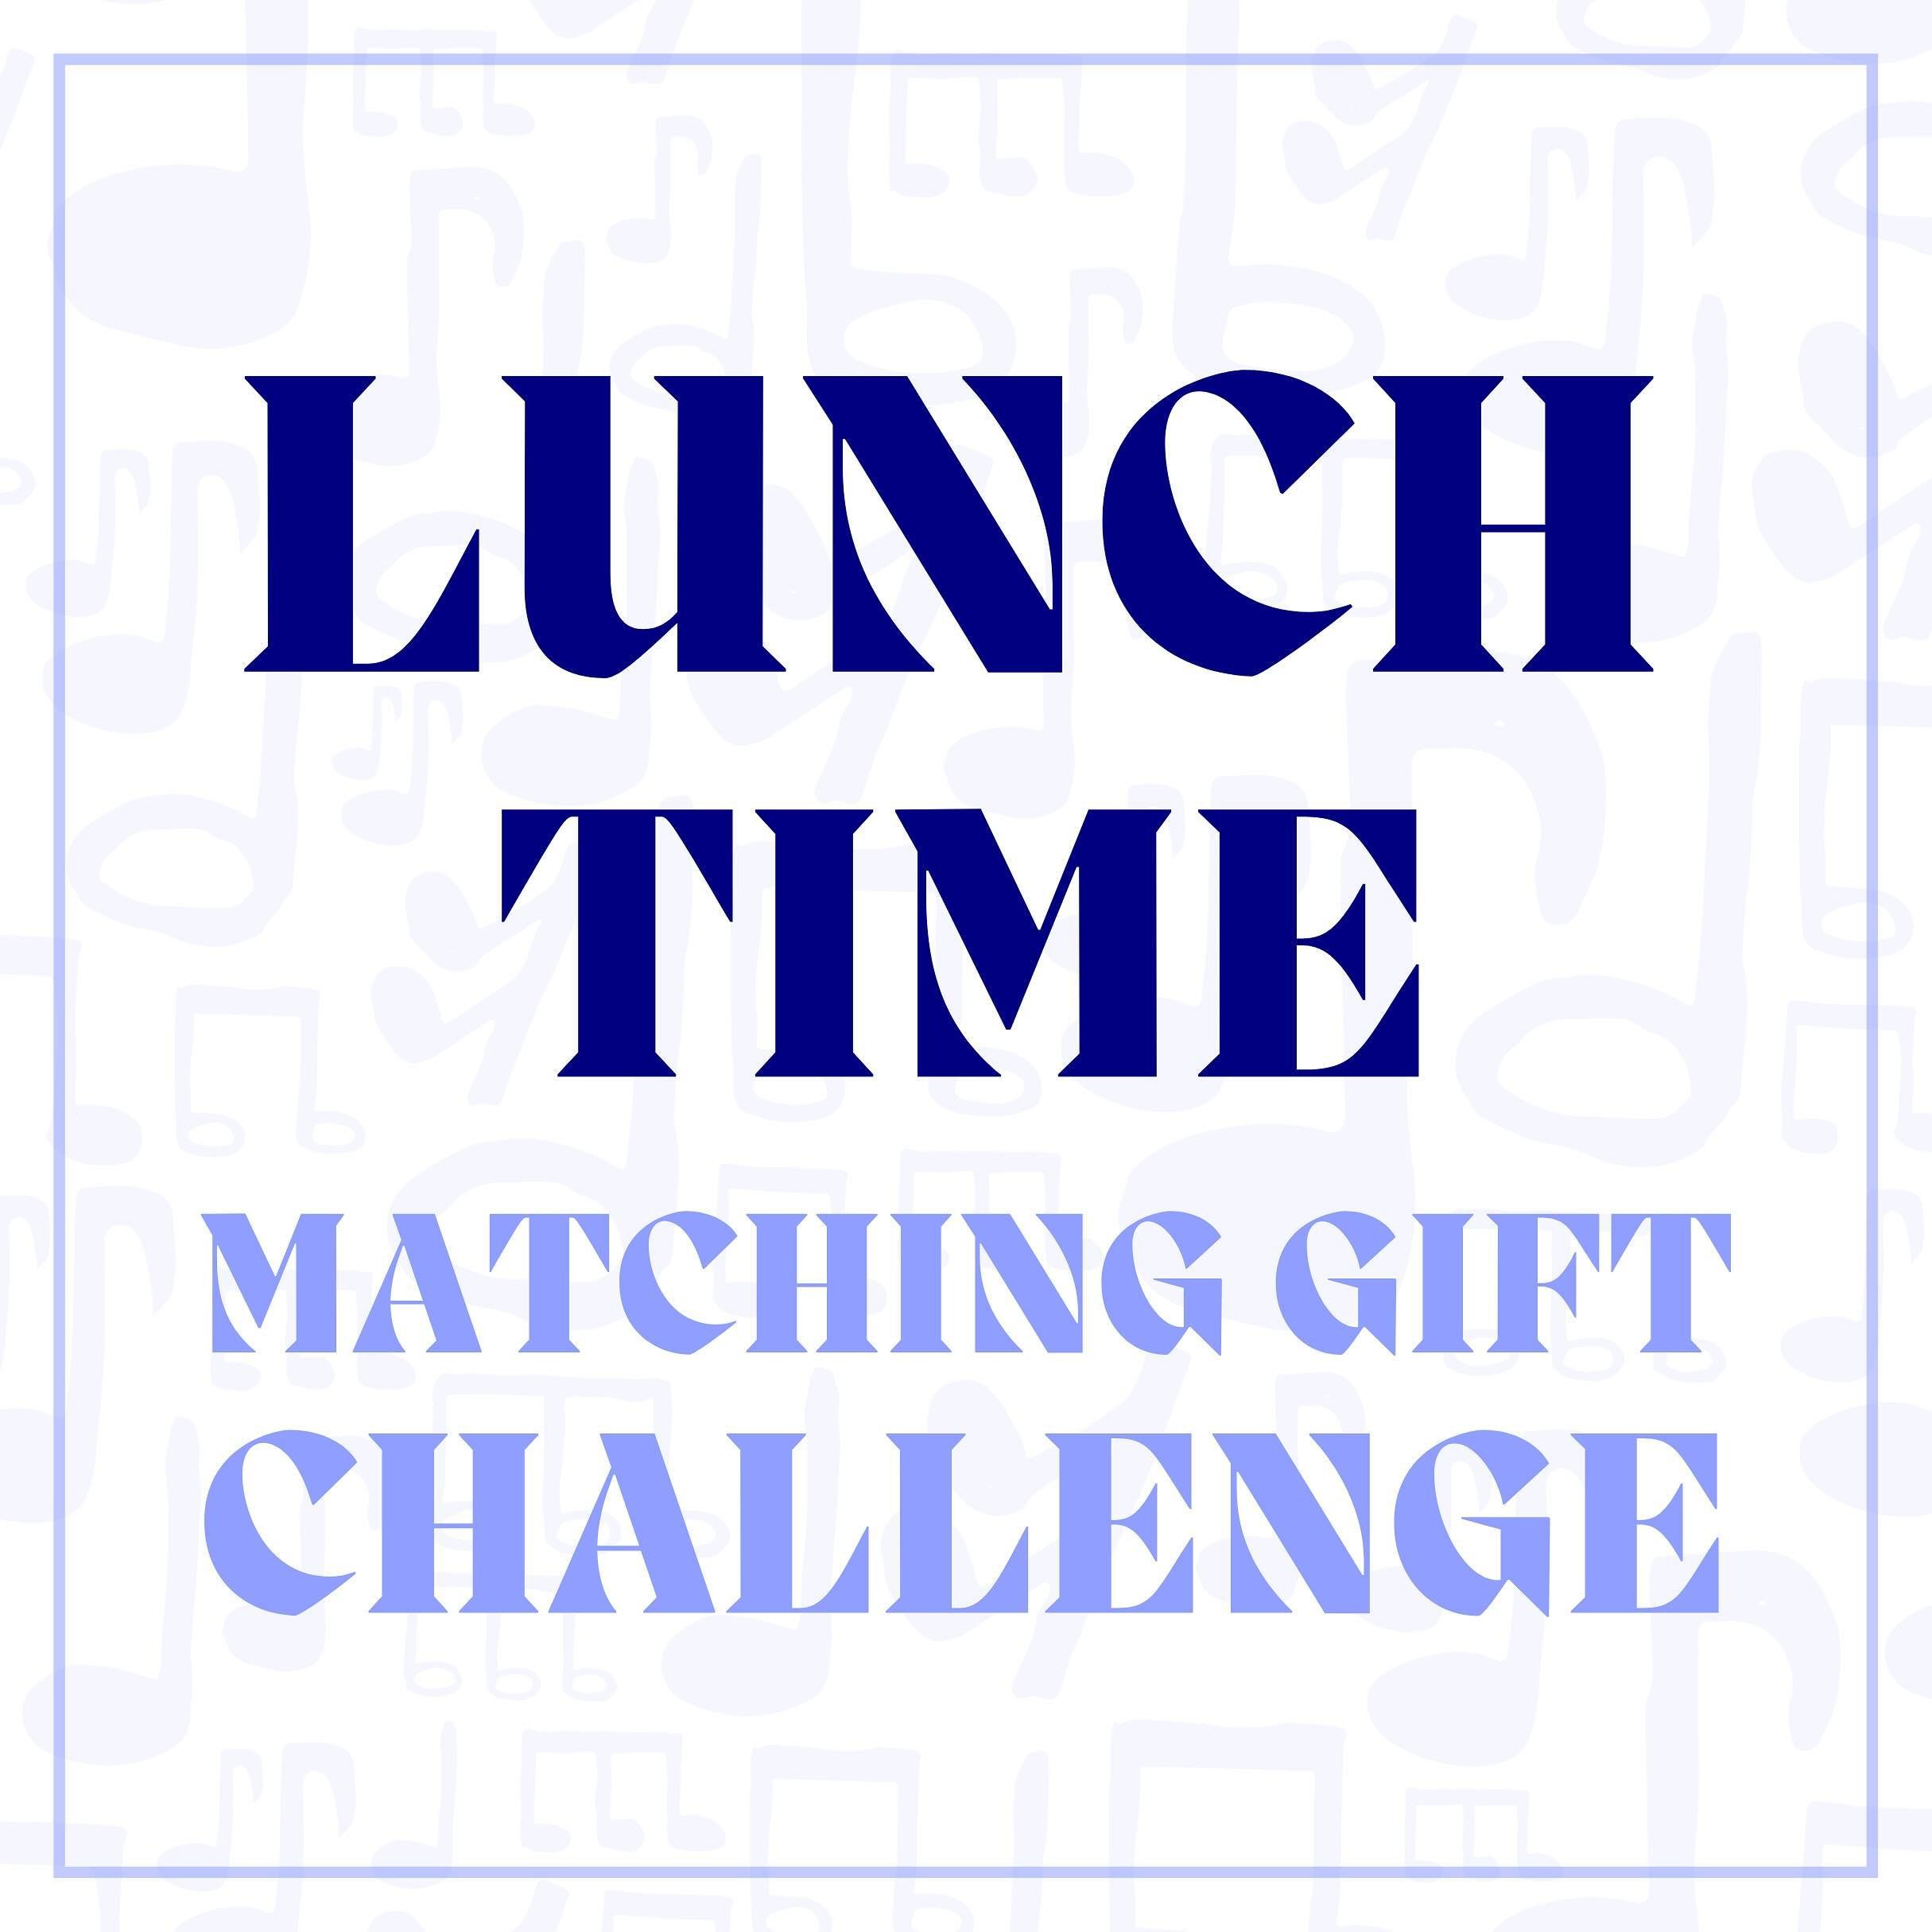 A friend of OA has pledged to match gifts given between 1-3 PM up to $1,000.

Let&rsquo;s meet this goal while also supporting OA students and the Fine and Performing Arts Departments!